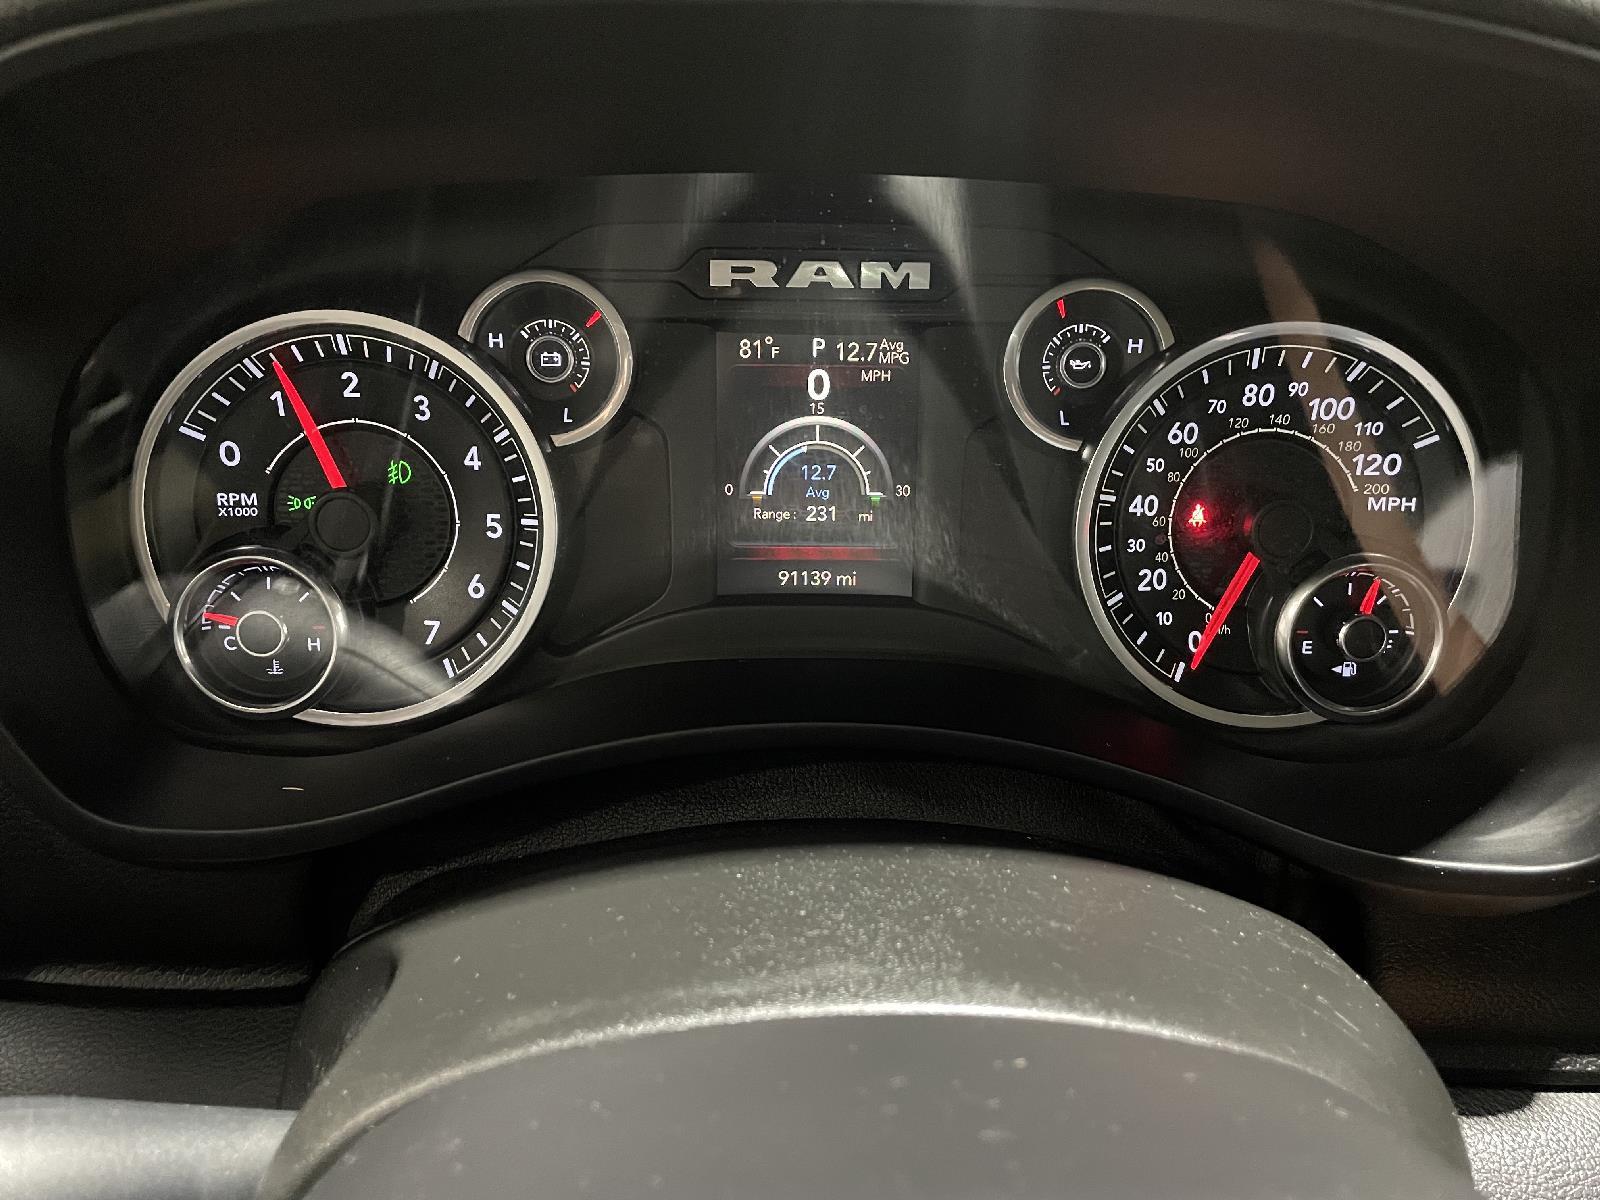 Used 2019 Ram 2500 Big Horn Crew Cab Truck for sale in St Joseph MO